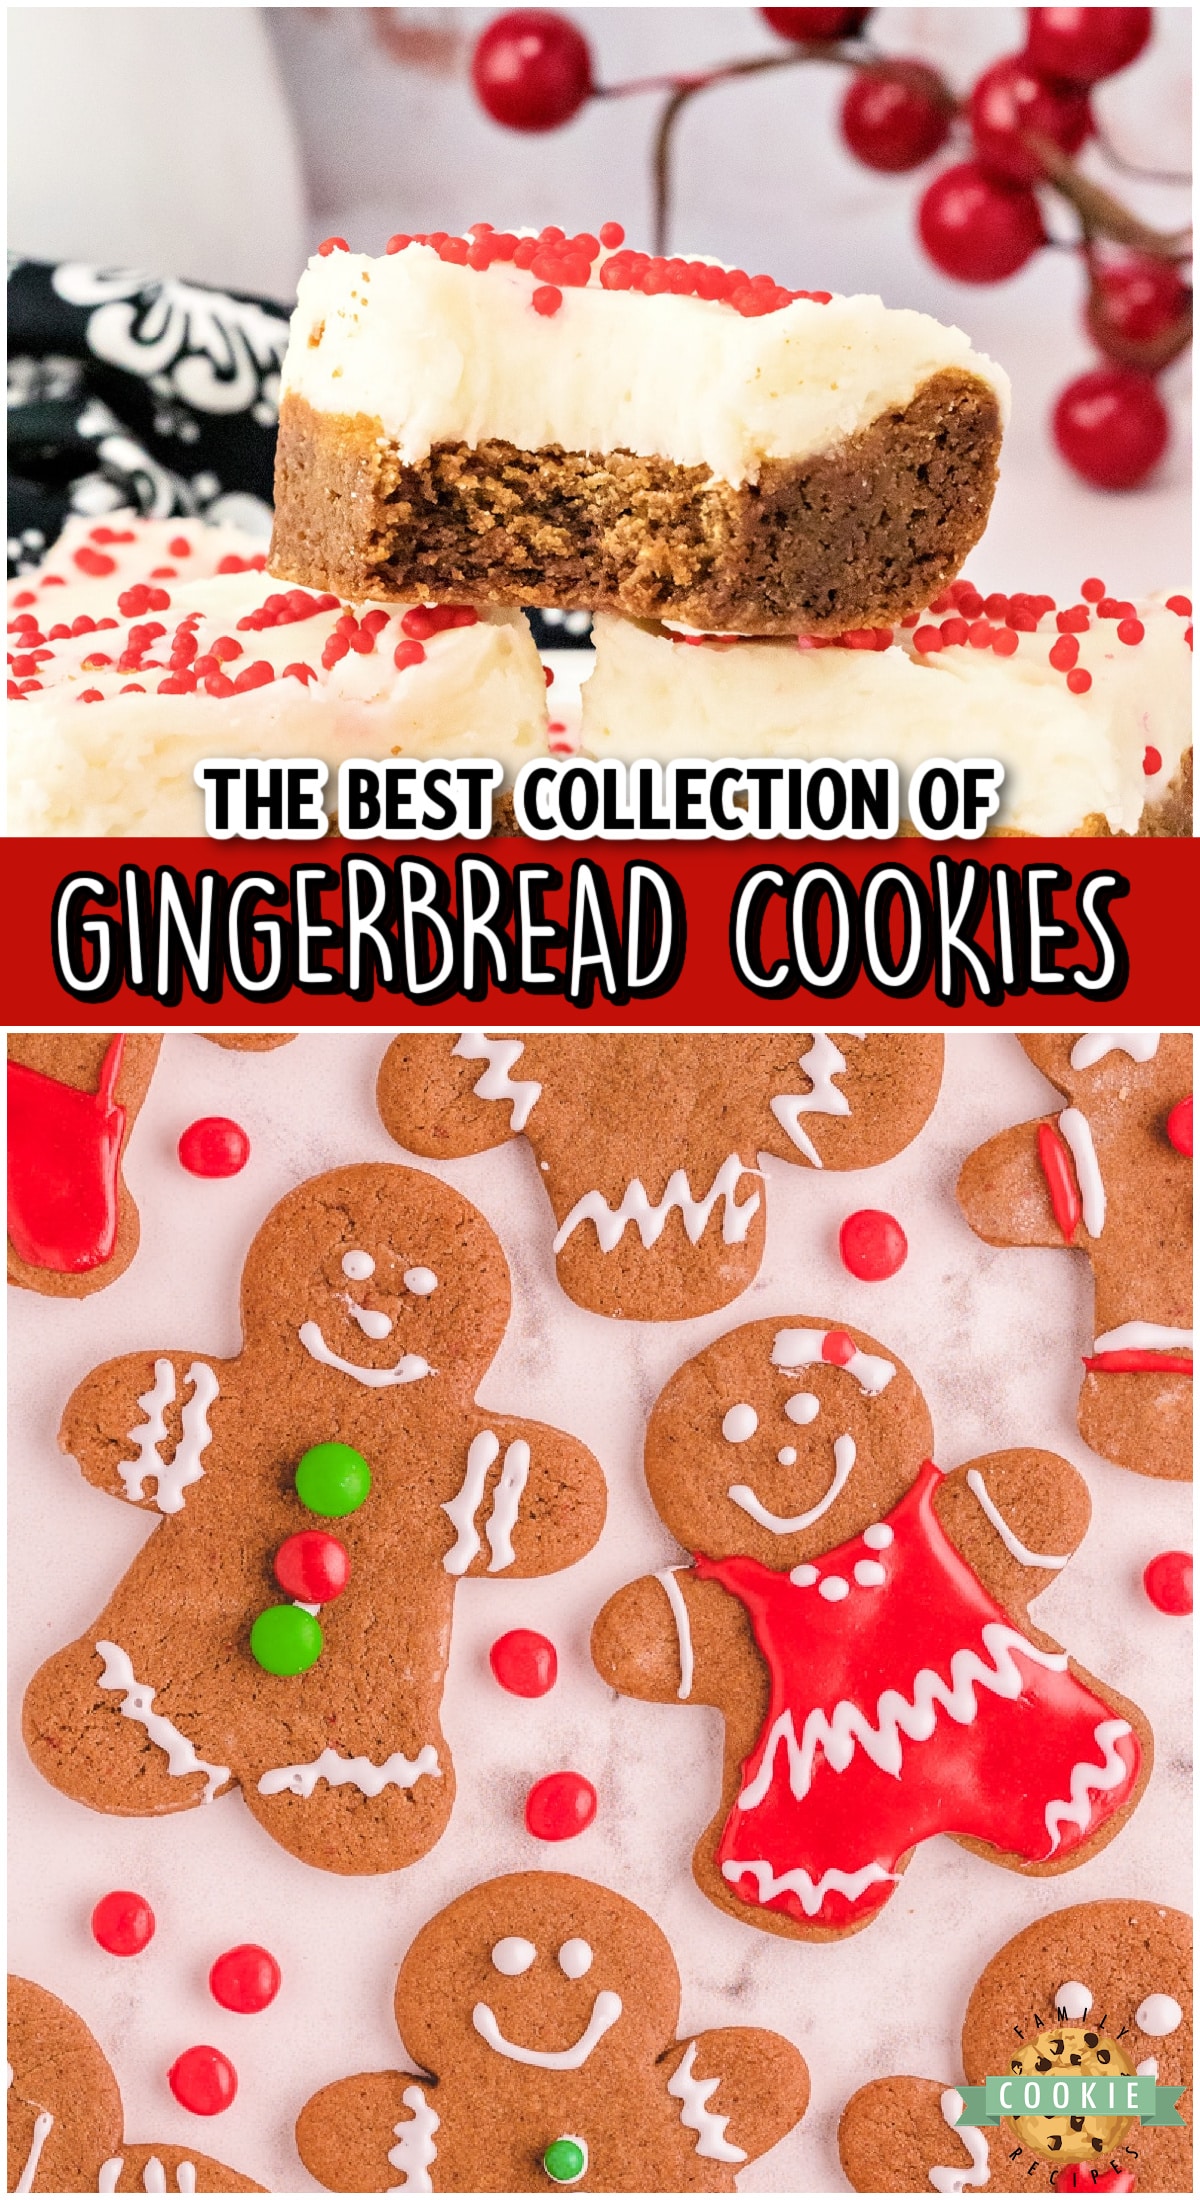 Gingerbread cookies are absolutely delicious during the holiday season! Over the years, we have created some absolutely amazing gingerbread cookie recipes. Each gingerbread cookie is a little bit different, but all of these cookie recipes are perfect for the holidays!